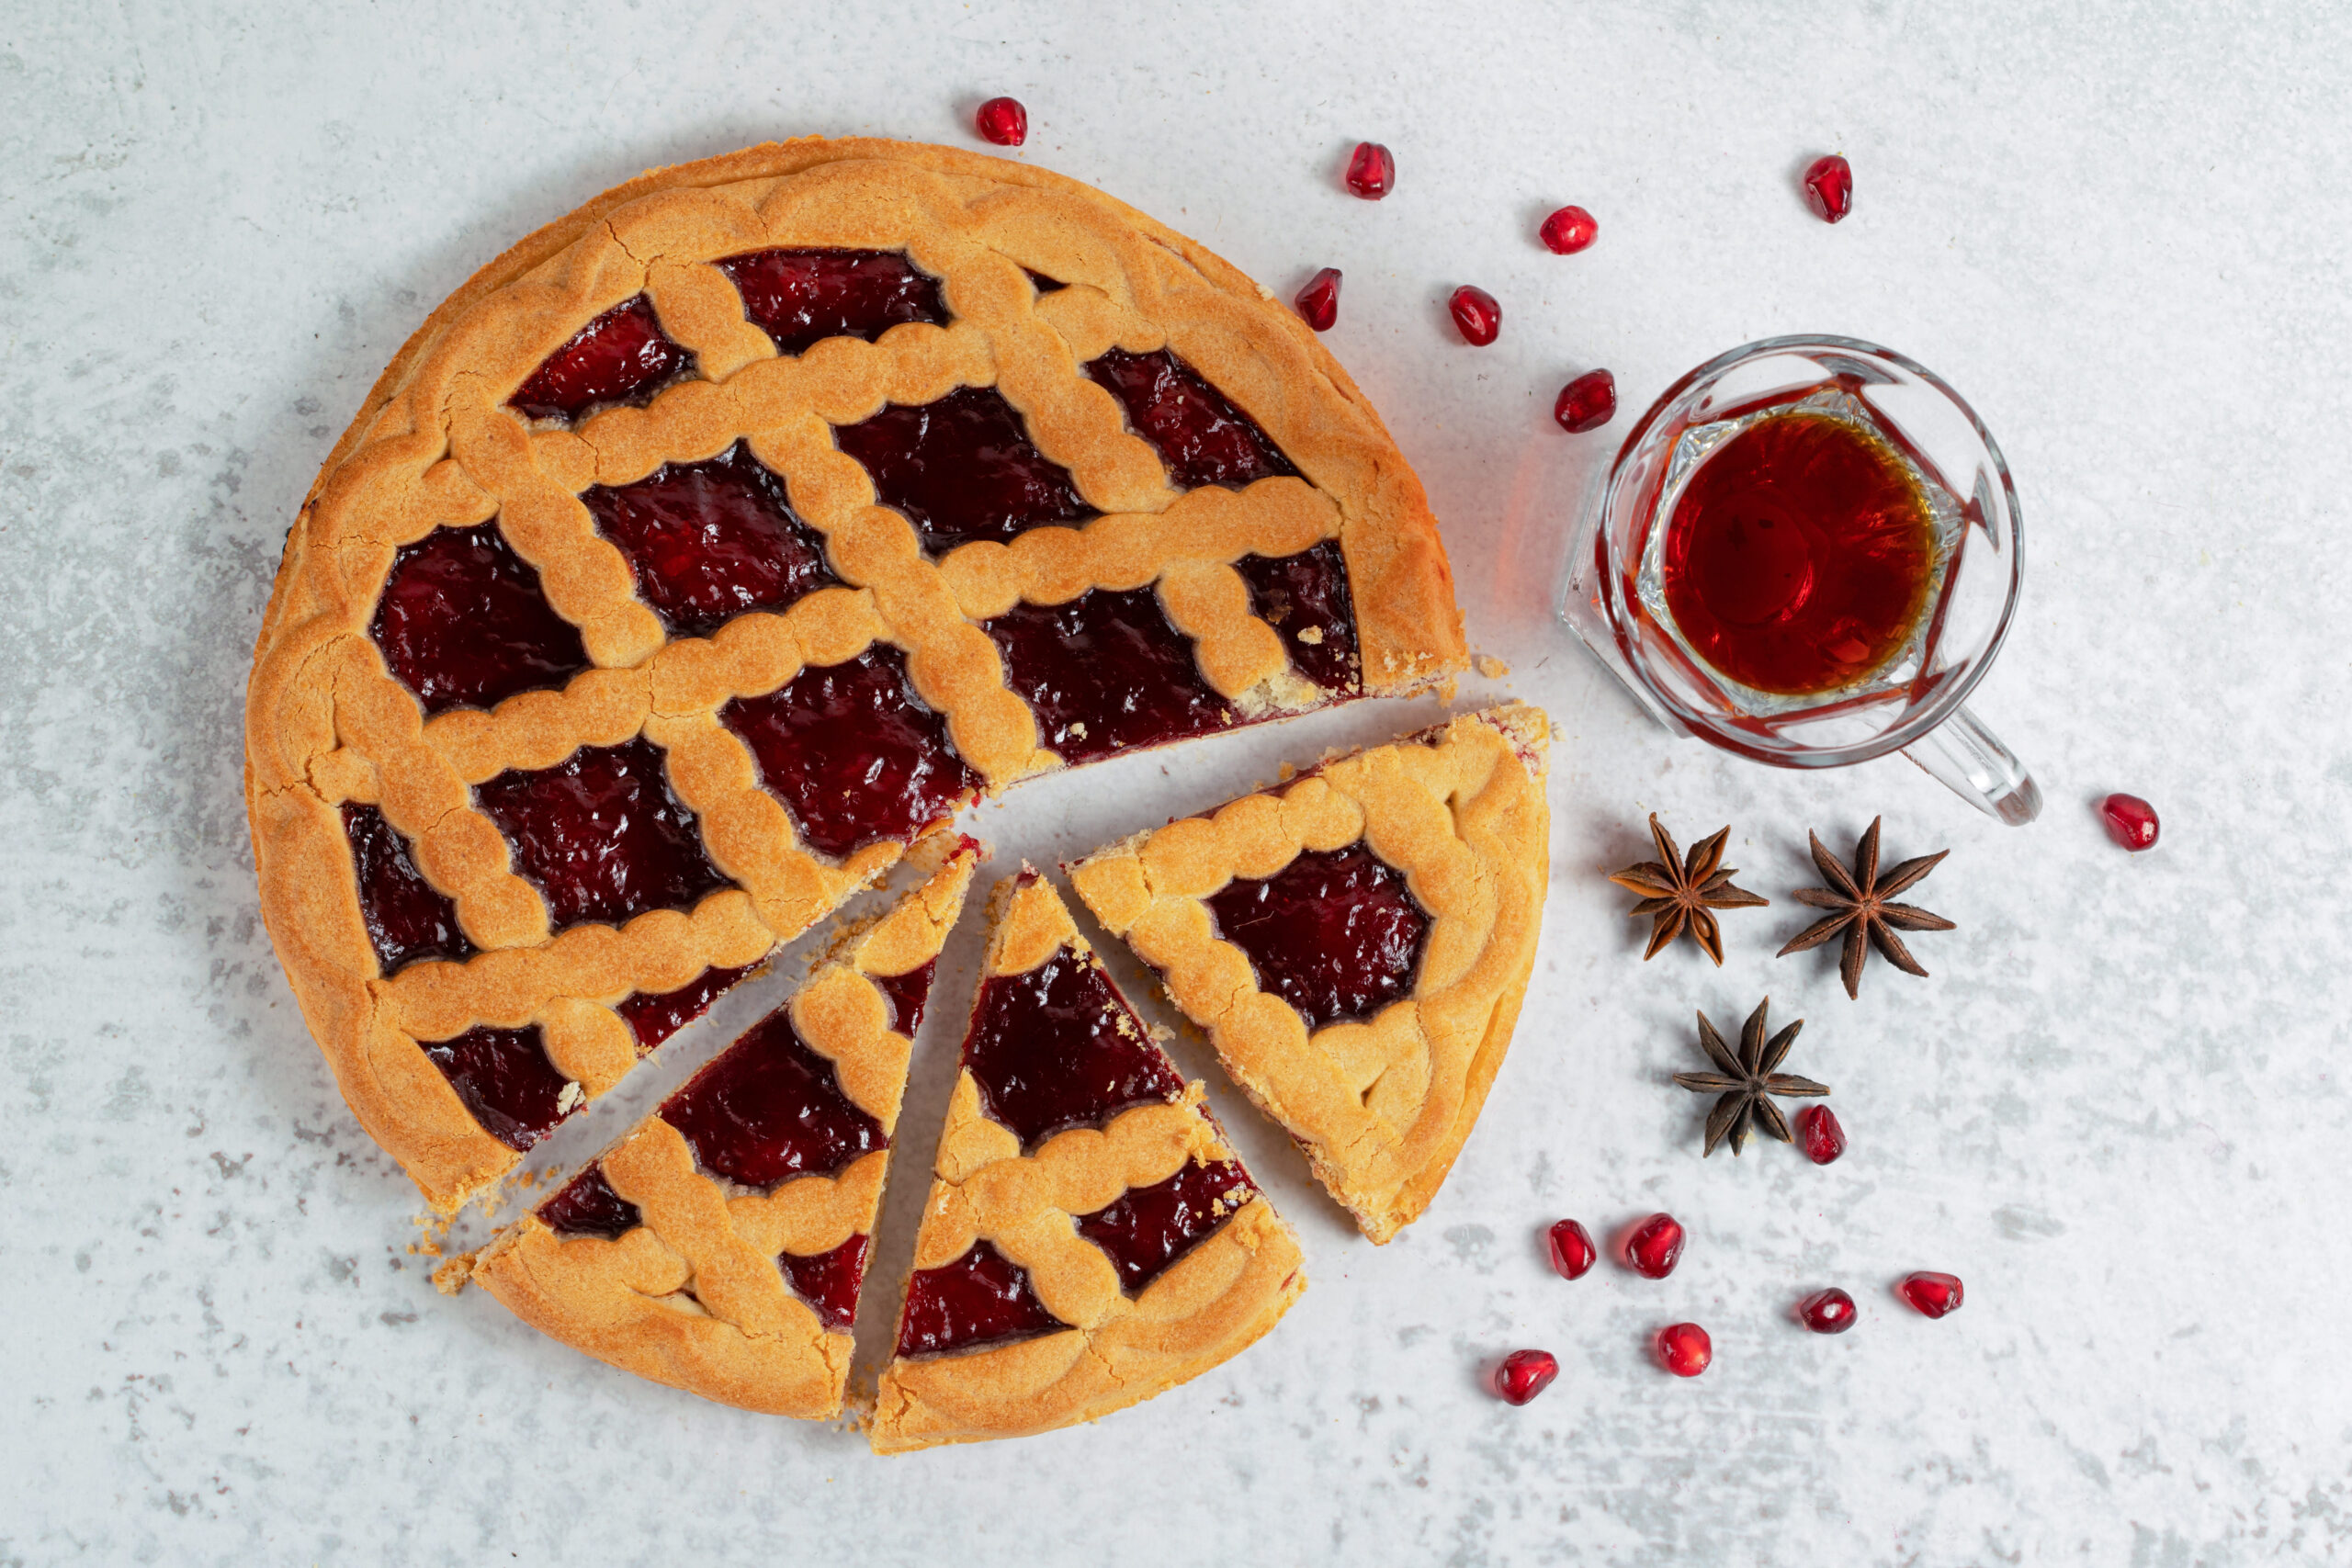 How to Make the Best Red Fruit Pie with Syrup